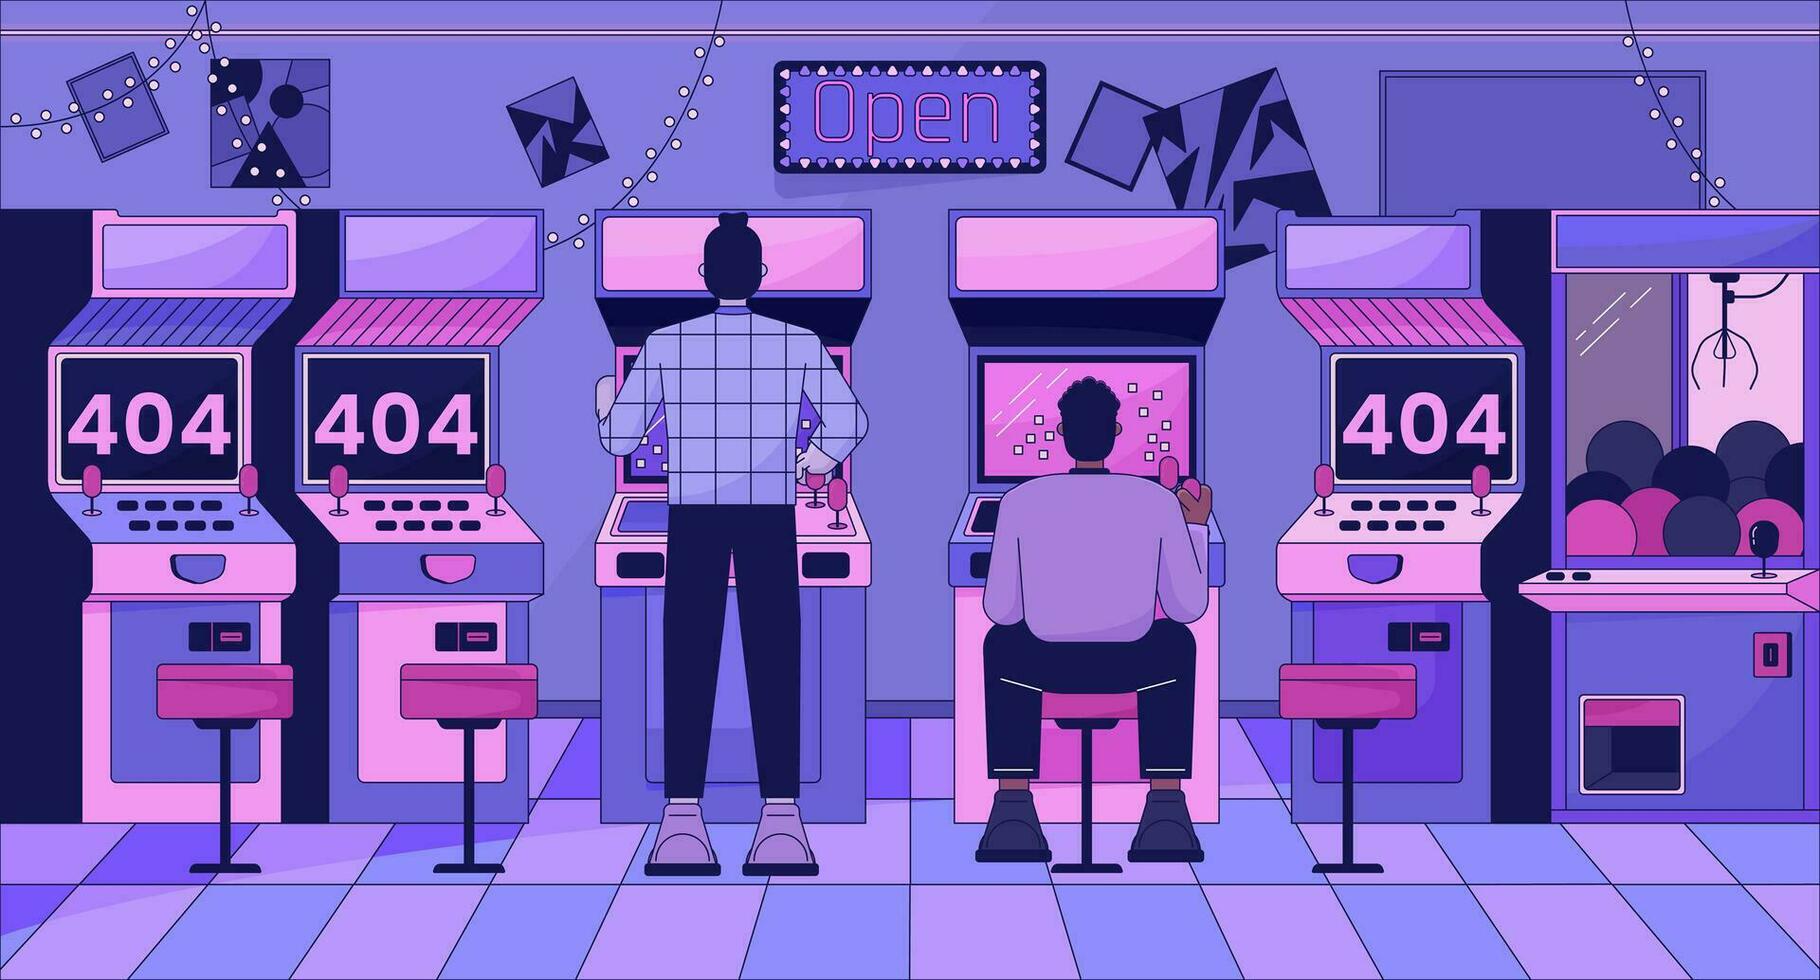 Man playing arcades error 404 flash message. Old school video gaming machine. Website landing page ui design. Not found cartoon image, dreamy vibes. Vector flat illustration with 90s retro background